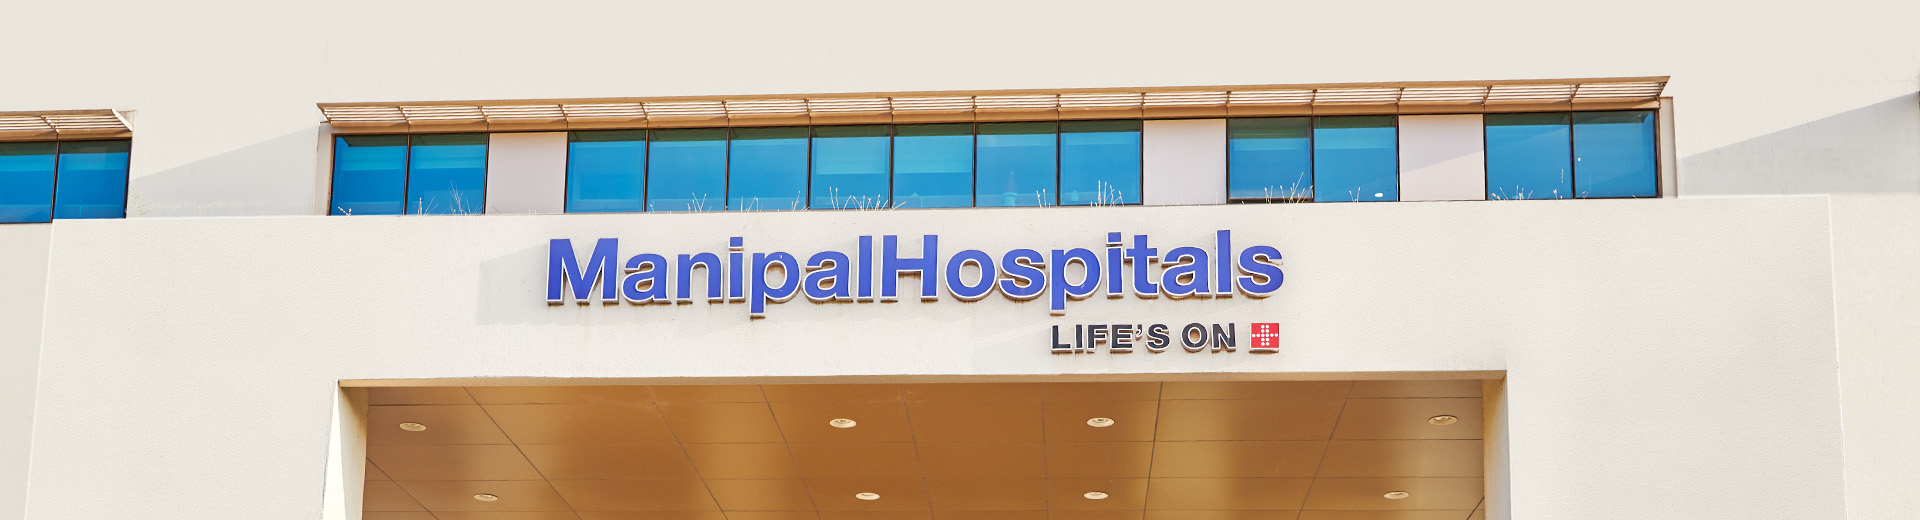 Privacy Policy of Manipal Hospitals Baner, Pune - Manipal Hospitals